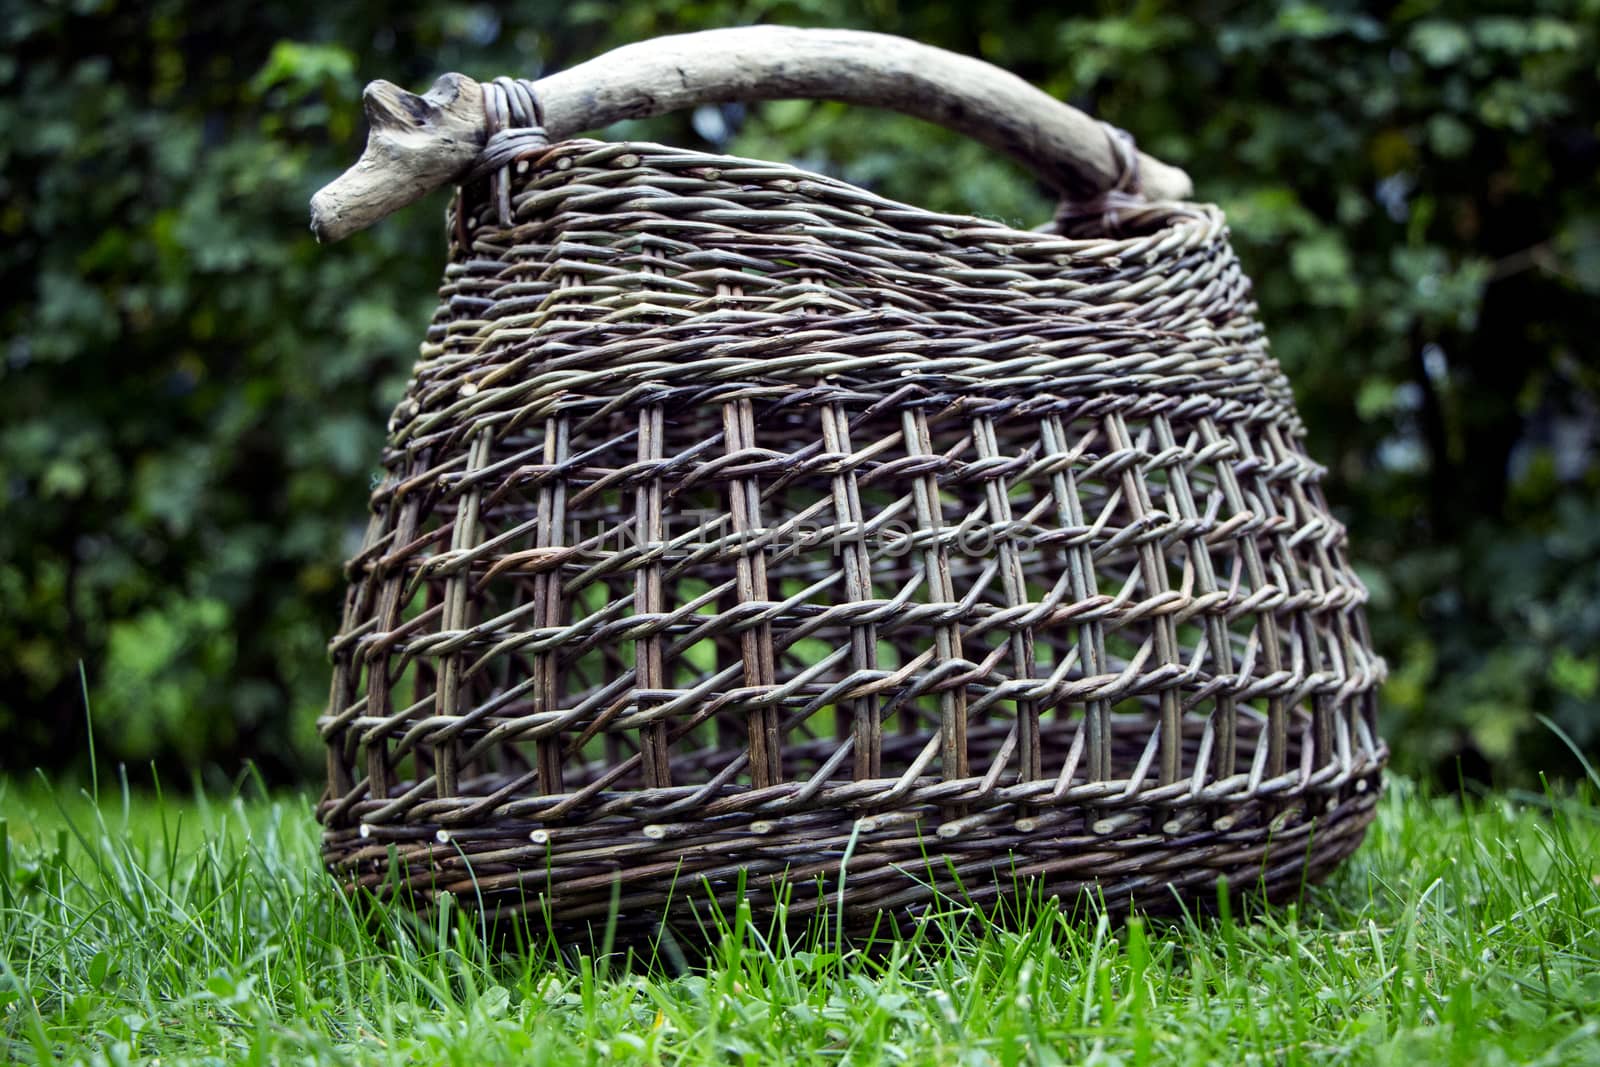 Beautiful basket of wicker with a stick as handle.